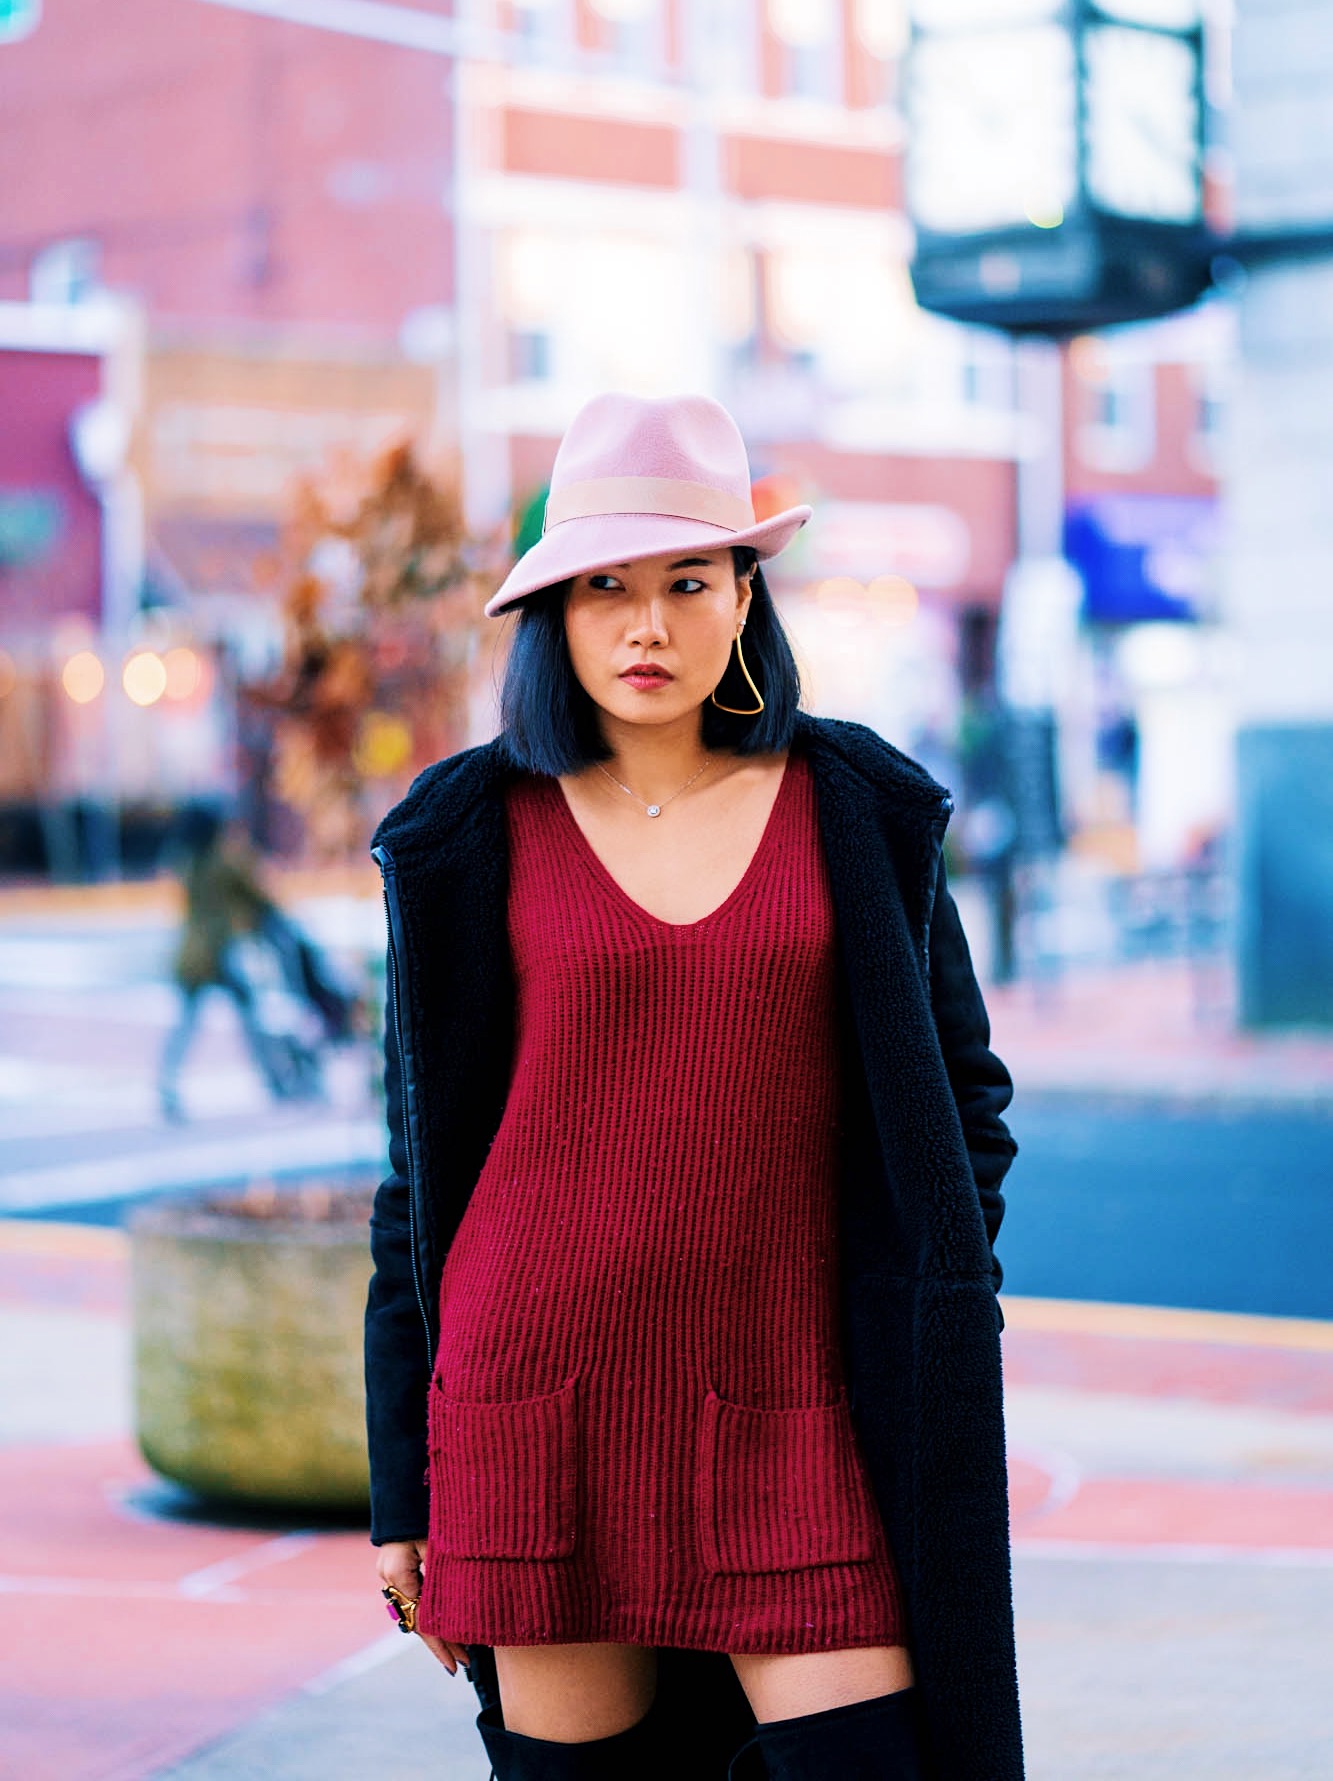 sweater dress with otk boots and a pink fedora hat